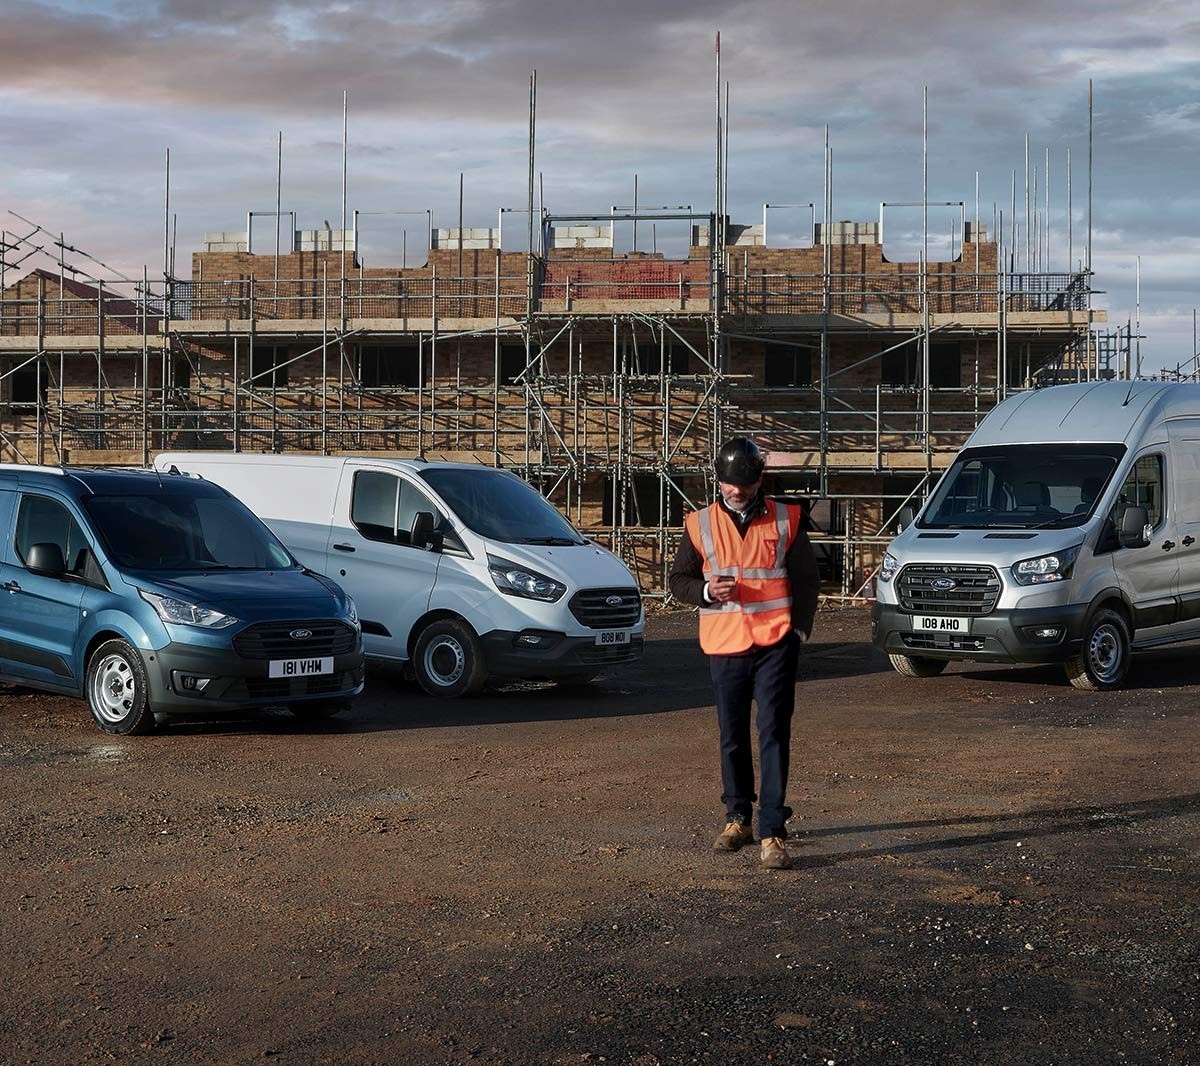 Building site with man in high viz jacket and various Ford cars